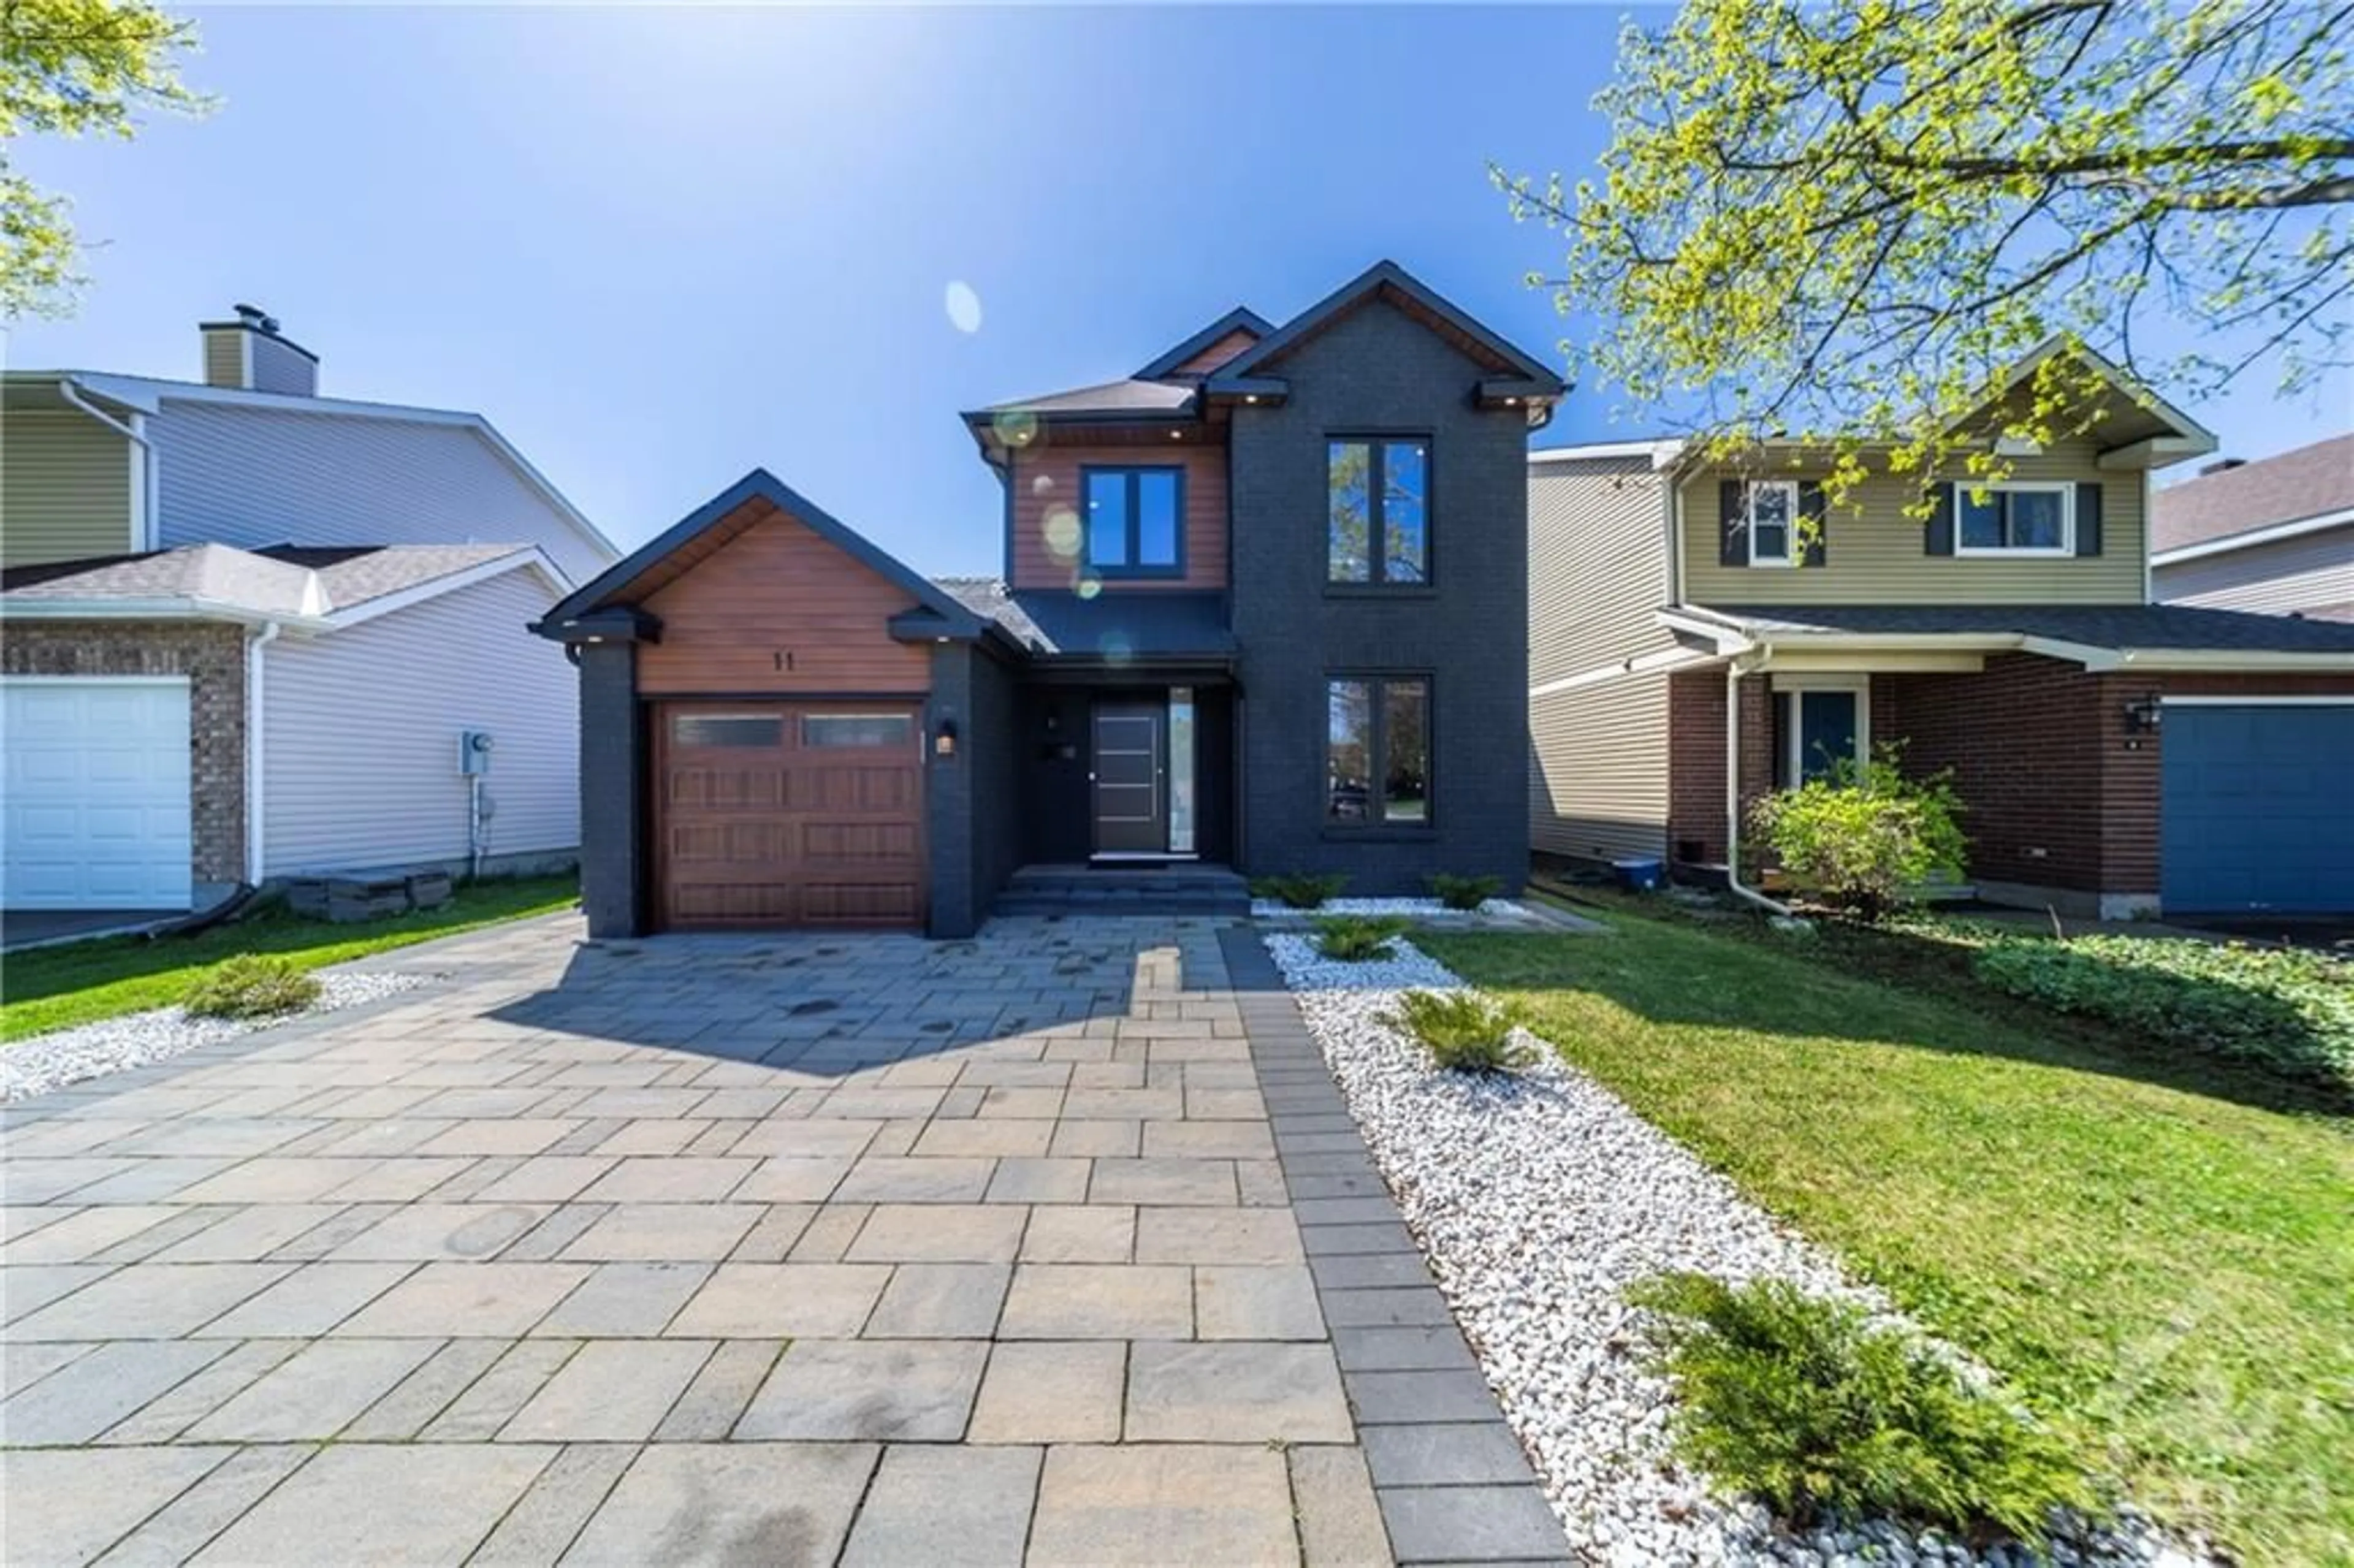 Home with brick exterior material for 11 SOVEREIGN Ave, Ottawa Ontario K2G 4Y1